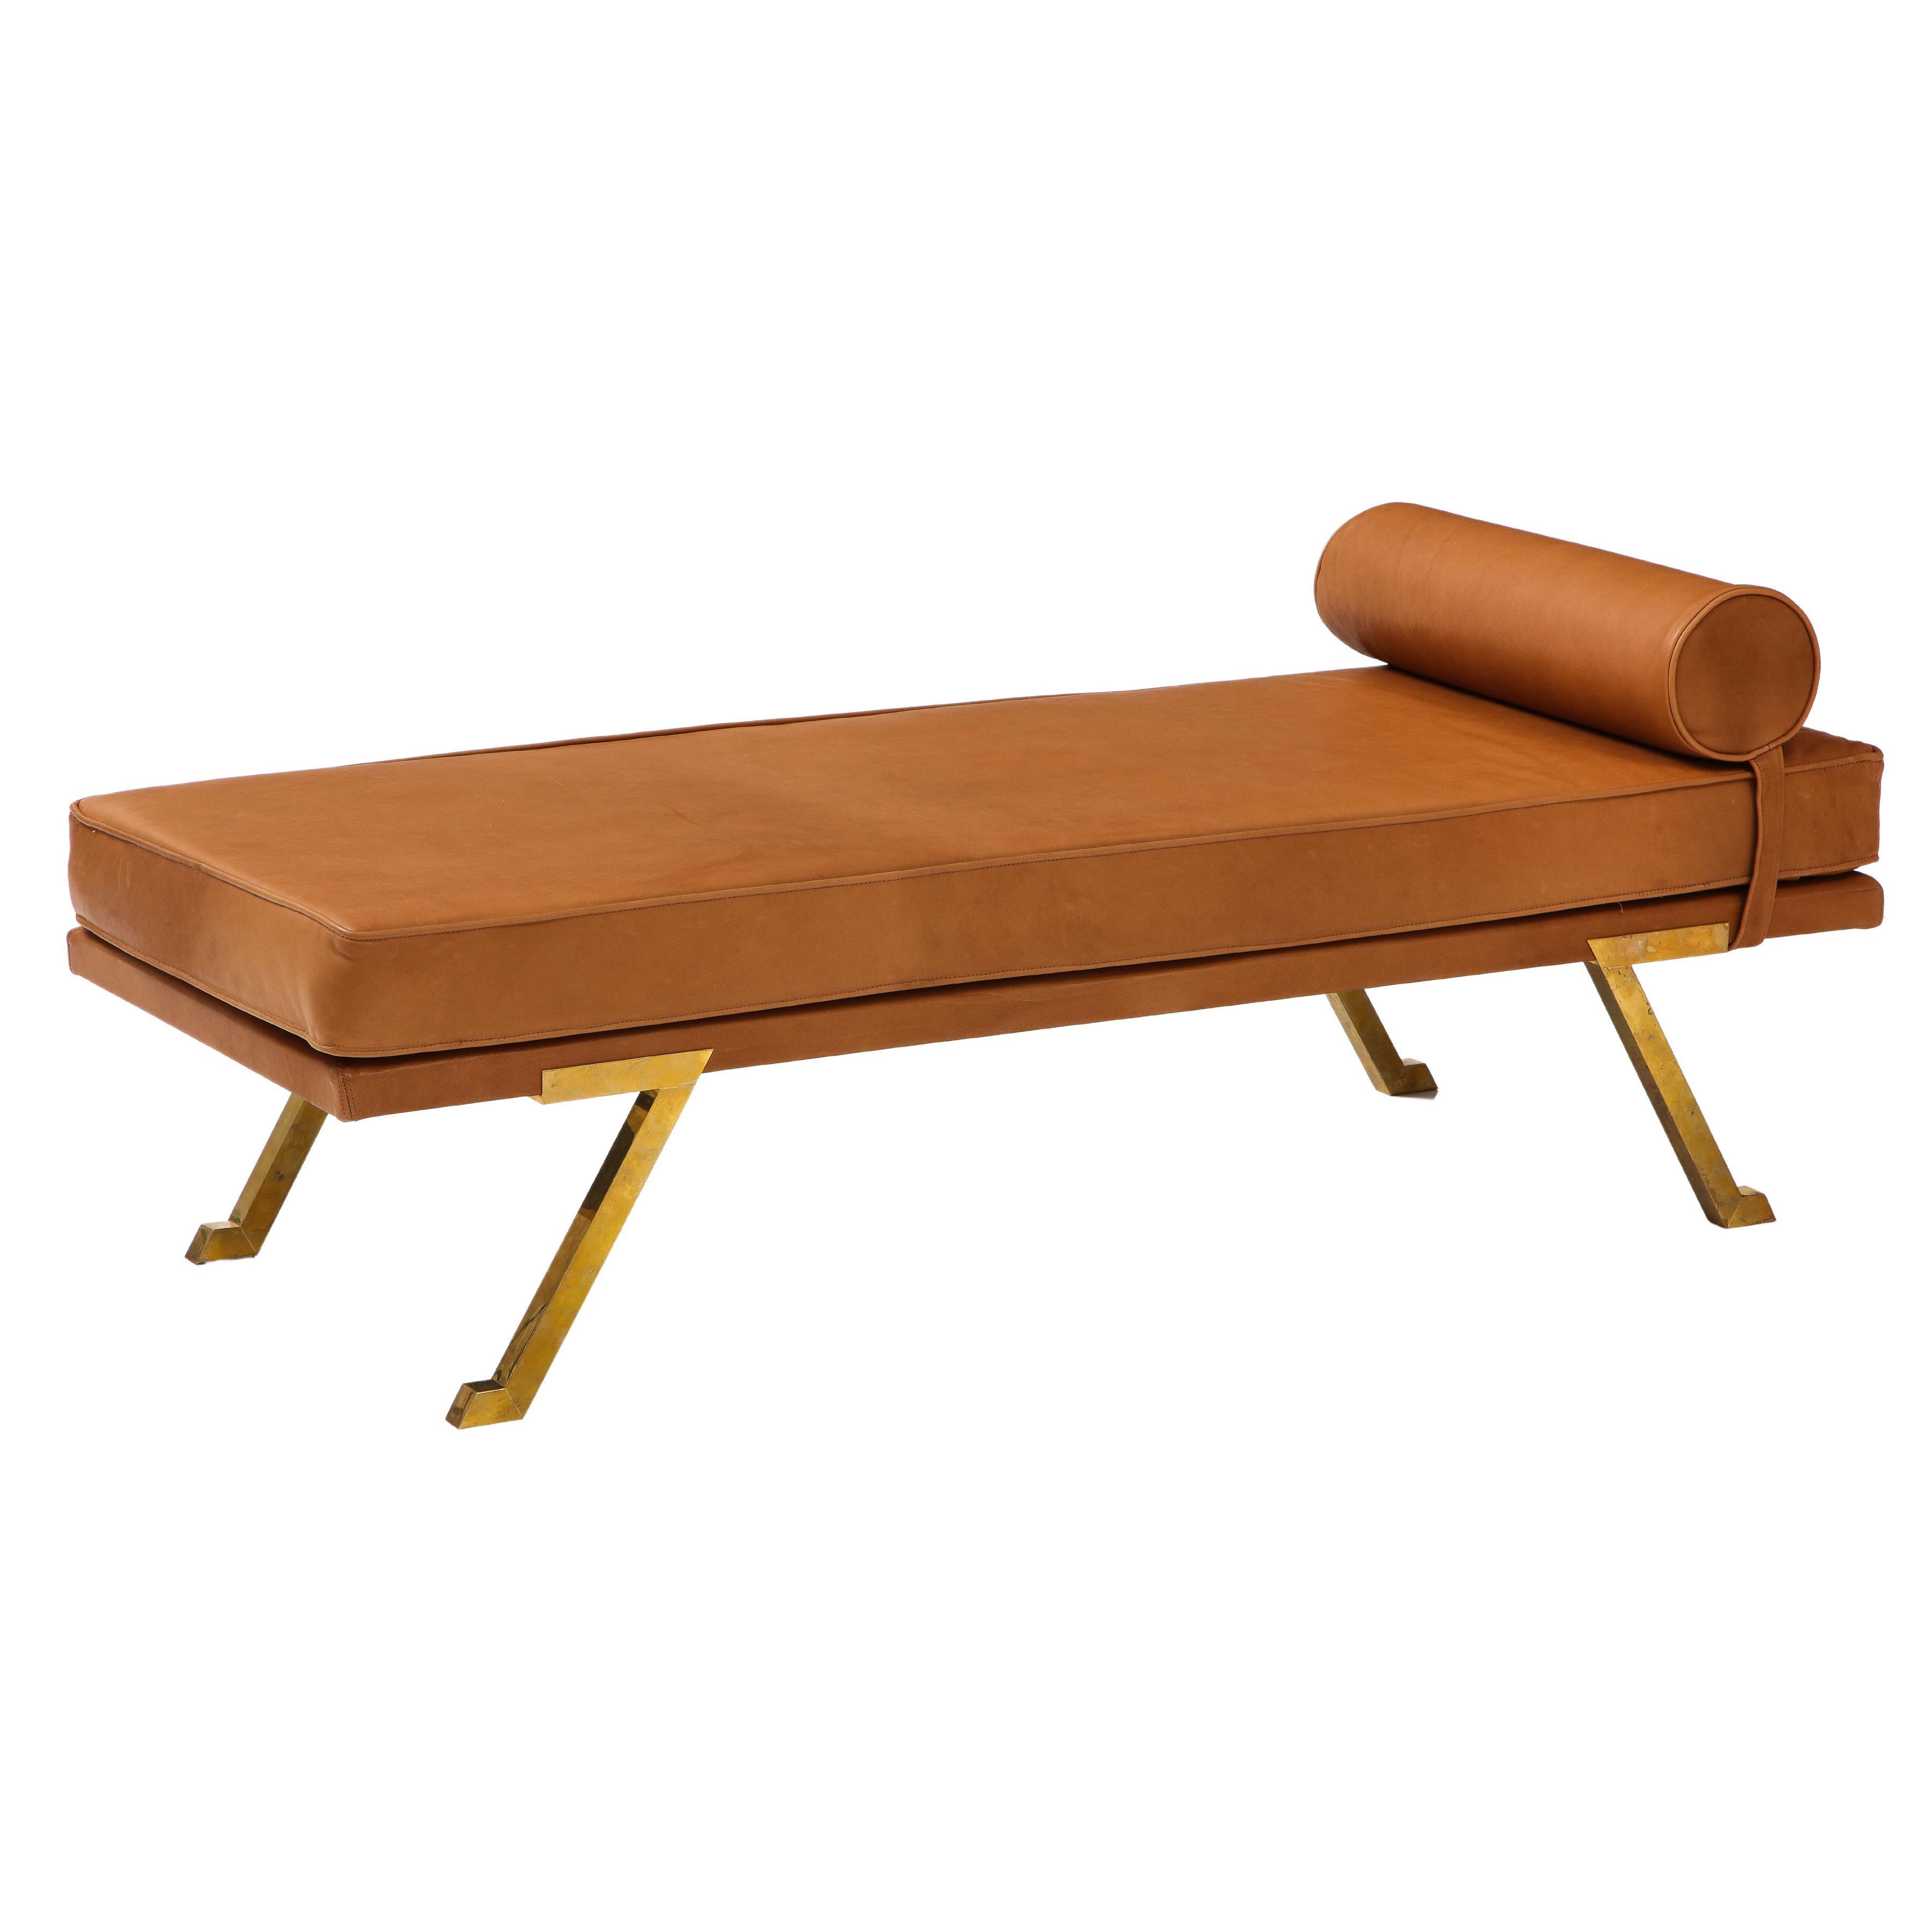 Italian 1970's Brass and Leather Day Bed or Chaise Longues